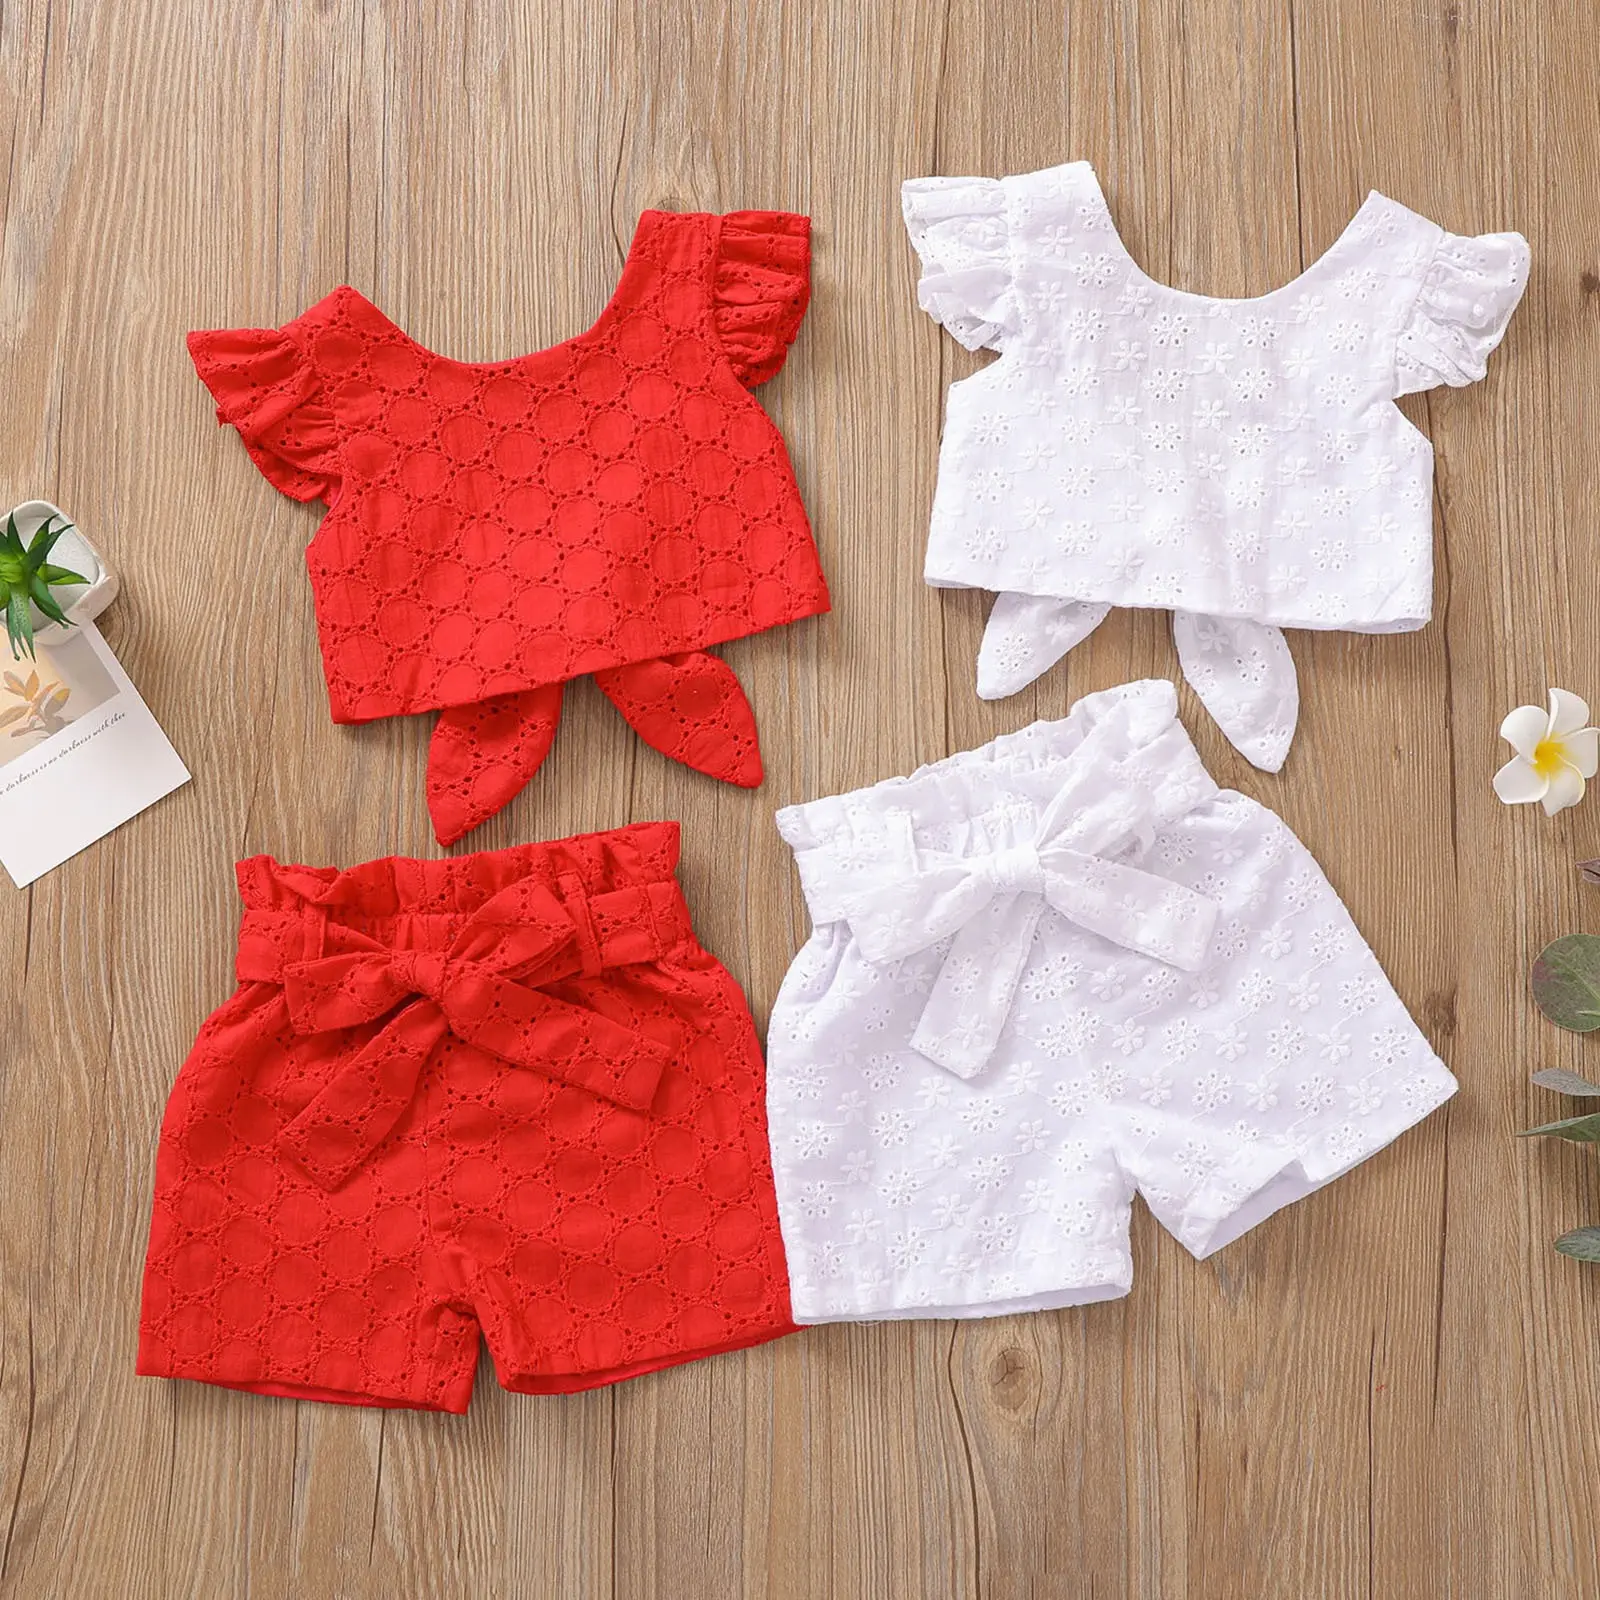 Toddler Girls Bow Tie Sleeves Plain Lace Tops Bowknot Skirt Two Piece Outfits Set for Children's Clothing Baby Blouse Girls